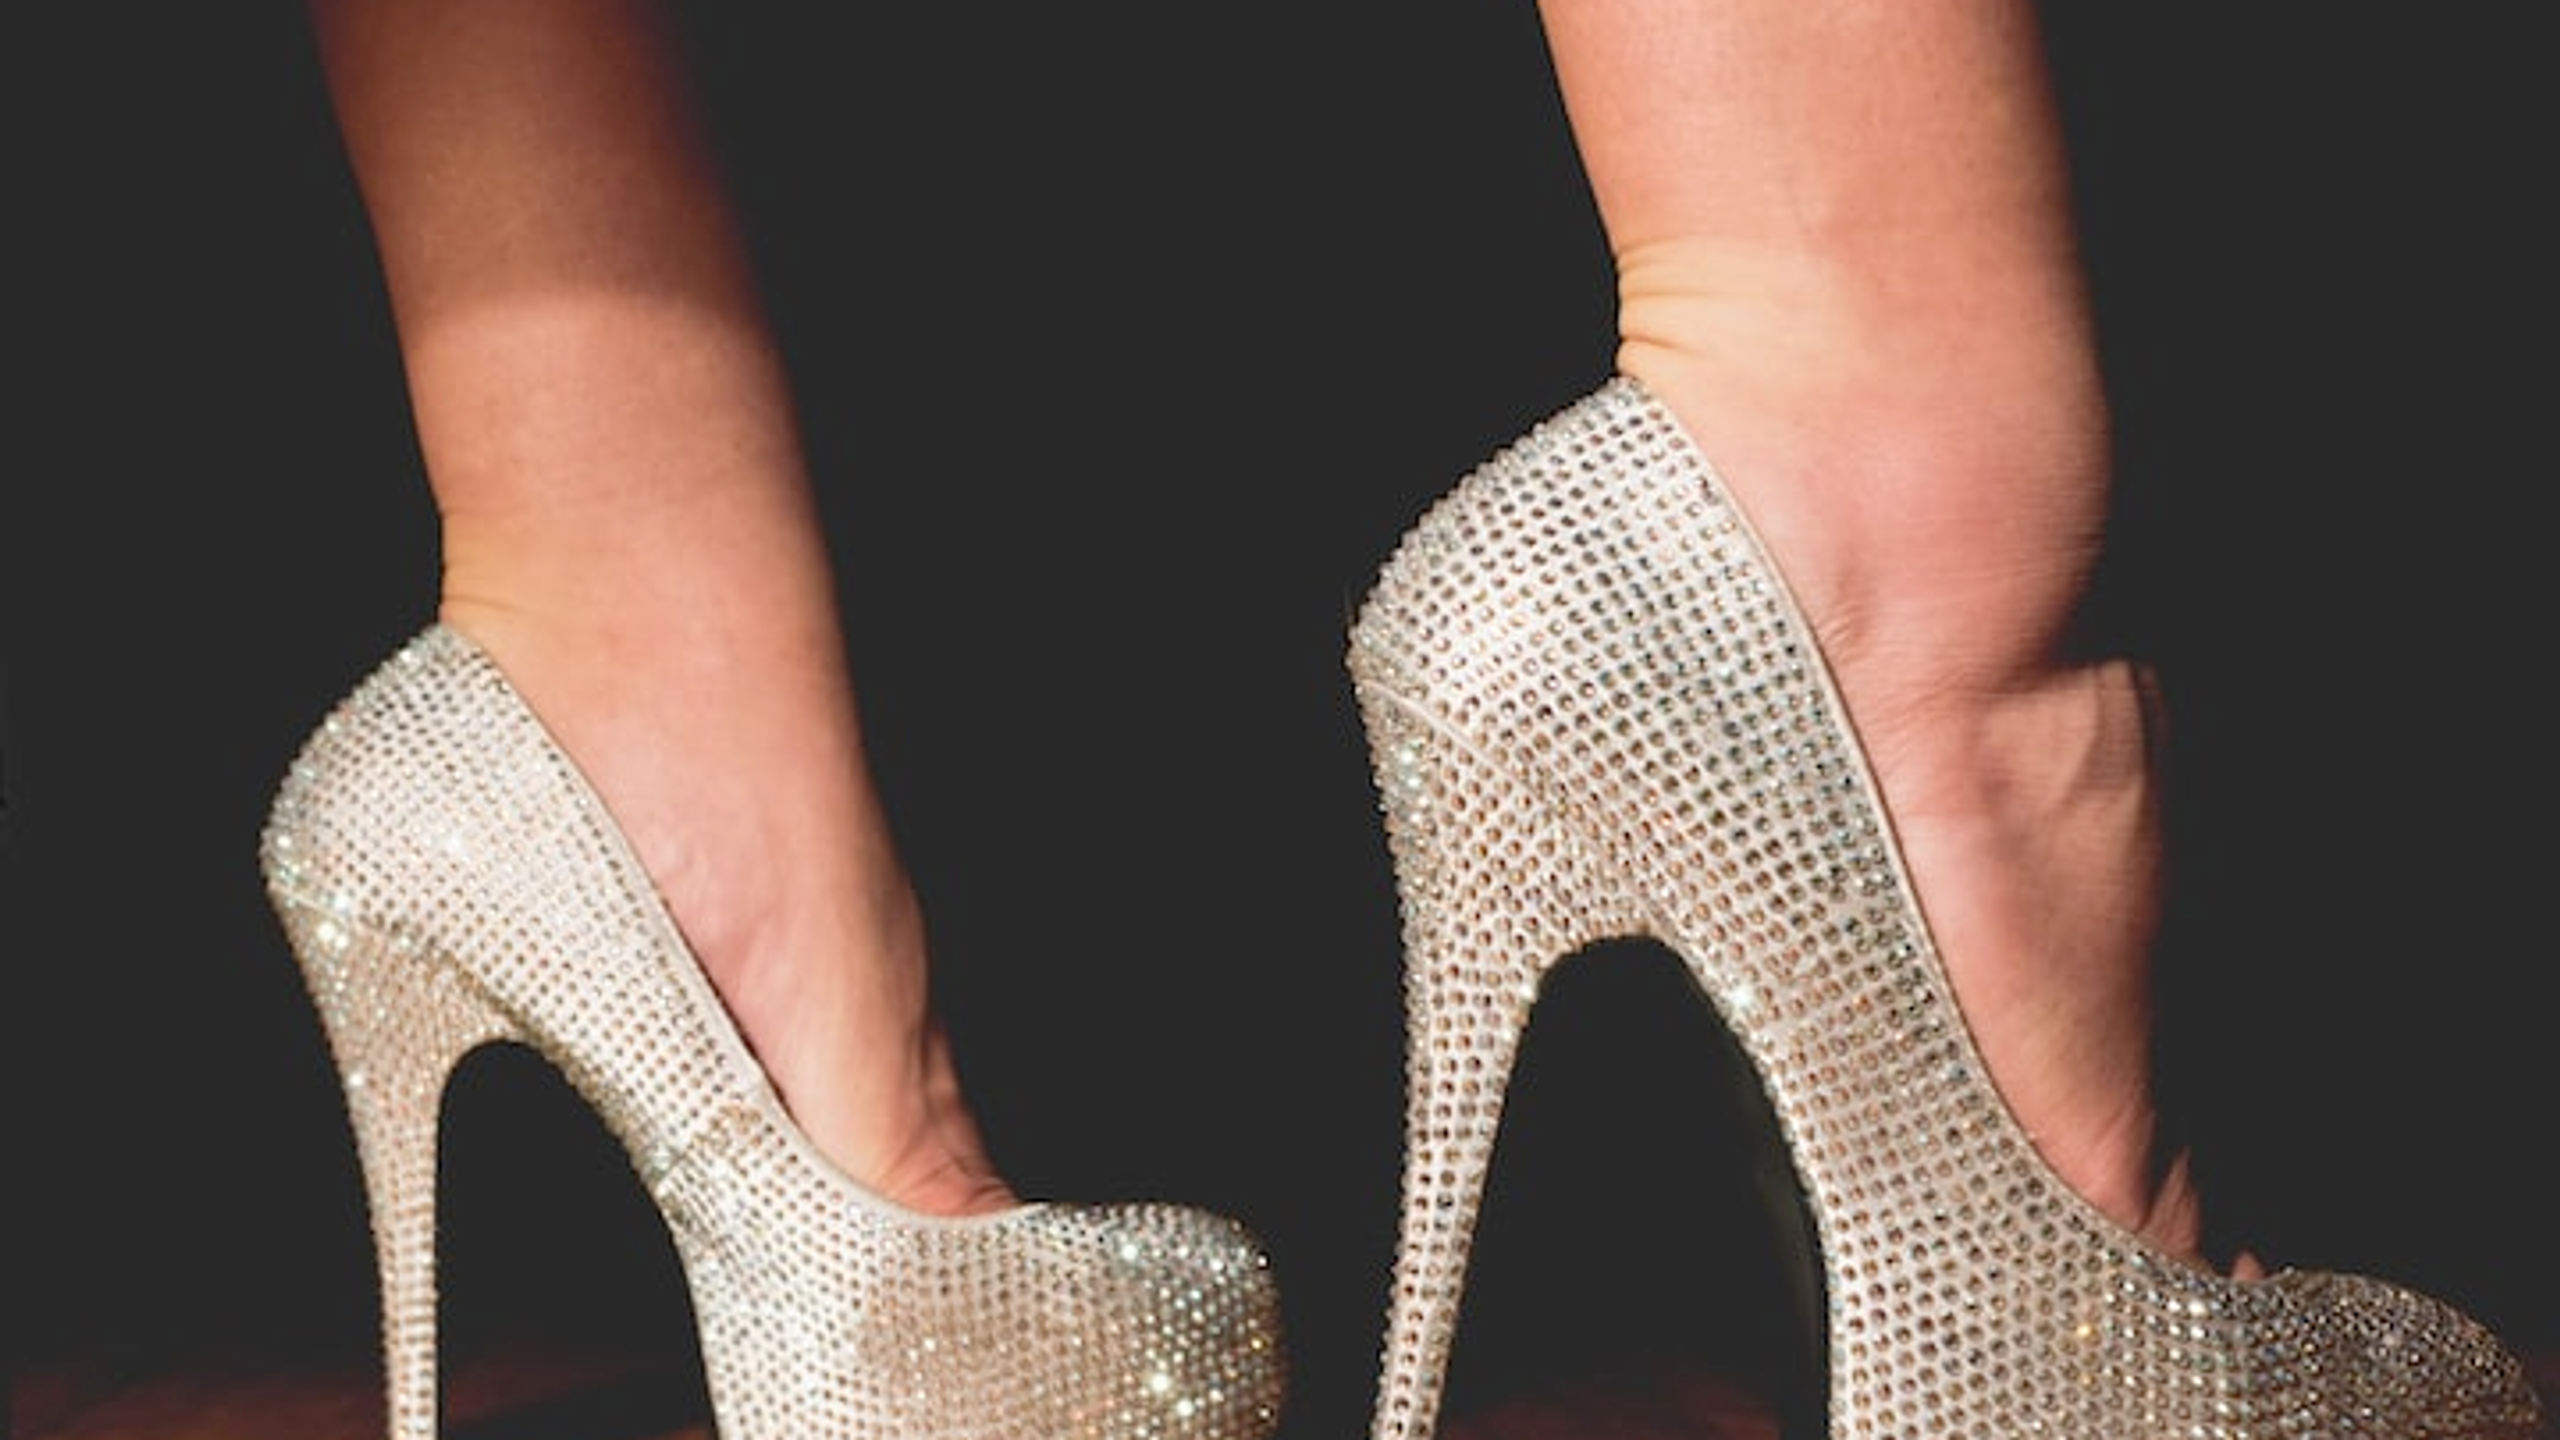 a woman wearing a pair of high heels with rhinestones on them​​​​‌﻿‍﻿​‍​‍‌‍﻿﻿‌﻿​‍‌‍‍‌‌‍‌﻿‌‍‍‌‌‍﻿‍​‍​‍​﻿‍‍​‍​‍‌﻿​﻿‌‍​‌‌‍﻿‍‌‍‍‌‌﻿‌​‌﻿‍‌​‍﻿‍‌‍‍‌‌‍﻿﻿​‍​‍​‍﻿​​‍​‍‌‍‍​‌﻿​‍‌‍‌‌‌‍‌‍​‍​‍​﻿‍‍​‍​‍‌‍‍​‌﻿‌​‌﻿‌​‌﻿​​​﻿‍‍​‍﻿﻿​‍﻿﻿‌‍﻿​‌‍﻿﻿‌‍​﻿‌‍​‌‌‍﻿​‌‍‍​‌‍﻿﻿‌﻿​﻿‌﻿‌​​﻿‍‍​﻿​﻿​﻿​﻿​﻿​﻿​﻿​﻿​‍﻿﻿‌‍‍‌‌‍﻿‍‌﻿‌​‌‍‌‌‌‍﻿‍‌﻿‌​​‍﻿﻿‌‍‌‌‌‍‌​‌‍‍‌‌﻿‌​​‍﻿﻿‌‍﻿‌‌‍﻿﻿‌‍‌​‌‍‌‌​﻿﻿‌‌﻿​​‌﻿​‍‌‍‌‌‌﻿​﻿‌‍‌‌‌‍﻿‍‌﻿‌​‌‍​‌‌﻿‌​‌‍‍‌‌‍﻿﻿‌‍﻿‍​﻿‍﻿‌‍‍‌‌‍‌​​﻿﻿‌​﻿‌﻿‌‍‌‌‌‍‌‌​﻿‍‌​﻿‌‍​﻿​‌‌‍‌‌​﻿​​​‍﻿‌​﻿‍‌​﻿​‍​﻿‌‍‌‍‌‌​‍﻿‌​﻿‌​‌‍‌​‌‍‌​​﻿‌﻿​‍﻿‌‌‍​‍​﻿​‍​﻿‍​​﻿‍‌​‍﻿‌​﻿‌‌​﻿‌﻿‌‍​‍‌‍‌‍‌‍​‌​﻿‌​‌‍‌​​﻿​​​﻿​‍‌‍​‍‌‍‌‌​﻿‌​​﻿‍﻿‌﻿‌​‌﻿‍‌‌﻿​​‌‍‌‌​﻿﻿‌‌﻿​﻿‌‍‍​‌‍﻿﻿‌‍‌‌​﻿‍﻿‌﻿​​‌‍​‌‌﻿‌​‌‍‍​​﻿﻿‌‌‍﻿‌‌‍‌‌‌‍‌​‌‍‍‌‌‍​‌​‍‌‌​﻿‌‌‌​​‍‌‌﻿﻿‌‍‍﻿‌‍‌‌‌﻿‍‌​‍‌‌​﻿​﻿‌​‌​​‍‌‌​﻿​﻿‌​‌​​‍‌‌​﻿​‍​﻿​‍‌‍​‌‌‍‌​​﻿‌‌‌‍‌‌​﻿‍‌‌‍​‌​﻿‌﻿‌‍‌​‌‍​‌​﻿‍​​﻿​‍​﻿‍​​‍‌‌​﻿​‍​﻿​‍​‍‌‌​﻿‌‌‌​‌​​‍﻿‍‌‍​‌‌‍﻿​‌﻿‌​​﻿﻿﻿‌‍​‍‌‍​‌‌﻿​﻿‌‍‌‌‌‌‌‌‌﻿​‍‌‍﻿​​﻿﻿‌‌‍‍​‌﻿‌​‌﻿‌​‌﻿​​​‍‌‌​﻿​﻿‌​​‌​‍‌‌​﻿​‍‌​‌‍​‍‌‌​﻿​‍‌​‌‍‌‍﻿​‌‍﻿﻿‌‍​﻿‌‍​‌‌‍﻿​‌‍‍​‌‍﻿﻿‌﻿​﻿‌﻿‌​​‍‌‌​﻿​﻿‌​​‌​﻿​﻿​﻿​﻿​﻿​﻿​﻿​﻿​‍‌‍‌‍‍‌‌‍‌​​﻿﻿‌​﻿‌﻿‌‍‌‌‌‍‌‌​﻿‍‌​﻿‌‍​﻿​‌‌‍‌‌​﻿​​​‍﻿‌​﻿‍‌​﻿​‍​﻿‌‍‌‍‌‌​‍﻿‌​﻿‌​‌‍‌​‌‍‌​​﻿‌﻿​‍﻿‌‌‍​‍​﻿​‍​﻿‍​​﻿‍‌​‍﻿‌​﻿‌‌​﻿‌﻿‌‍​‍‌‍‌‍‌‍​‌​﻿‌​‌‍‌​​﻿​​​﻿​‍‌‍​‍‌‍‌‌​﻿‌​​‍‌‍‌﻿‌​‌﻿‍‌‌﻿​​‌‍‌‌​﻿﻿‌‌﻿​﻿‌‍‍​‌‍﻿﻿‌‍‌‌​‍‌‍‌﻿​​‌‍​‌‌﻿‌​‌‍‍​​﻿﻿‌‌‍﻿‌‌‍‌‌‌‍‌​‌‍‍‌‌‍​‌​‍‌‌​﻿‌‌‌​​‍‌‌﻿﻿‌‍‍﻿‌‍‌‌‌﻿‍‌​‍‌‌​﻿​﻿‌​‌​​‍‌‌​﻿​﻿‌​‌​​‍‌‌​﻿​‍​﻿​‍‌‍​‌‌‍‌​​﻿‌‌‌‍‌‌​﻿‍‌‌‍​‌​﻿‌﻿‌‍‌​‌‍​‌​﻿‍​​﻿​‍​﻿‍​​‍‌‌​﻿​‍​﻿​‍​‍‌‌​﻿‌‌‌​‌​​‍﻿‍‌‍​‌‌‍﻿​‌﻿‌​​‍​‍‌﻿﻿‌